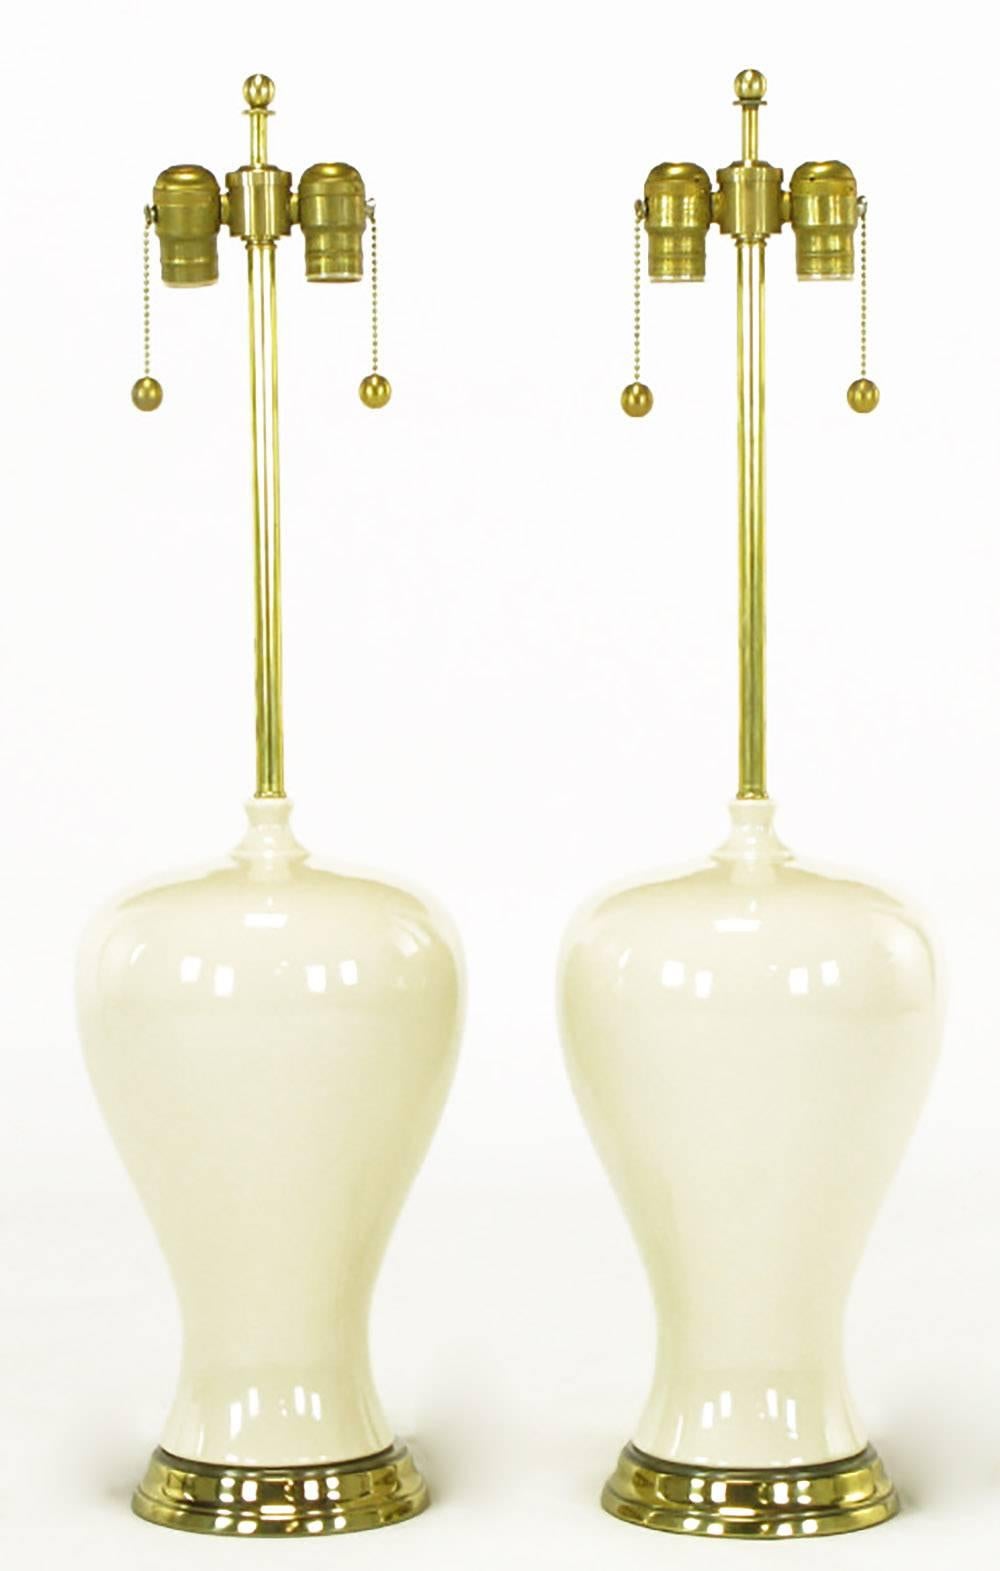 Pair of voluptuous ivory glazed ceramic table lamps with patinated brass finished bases. Organic form moves seamlessly from base through the ivory ceramic body to the brass stem and double socket cluster. Sold sans shades.